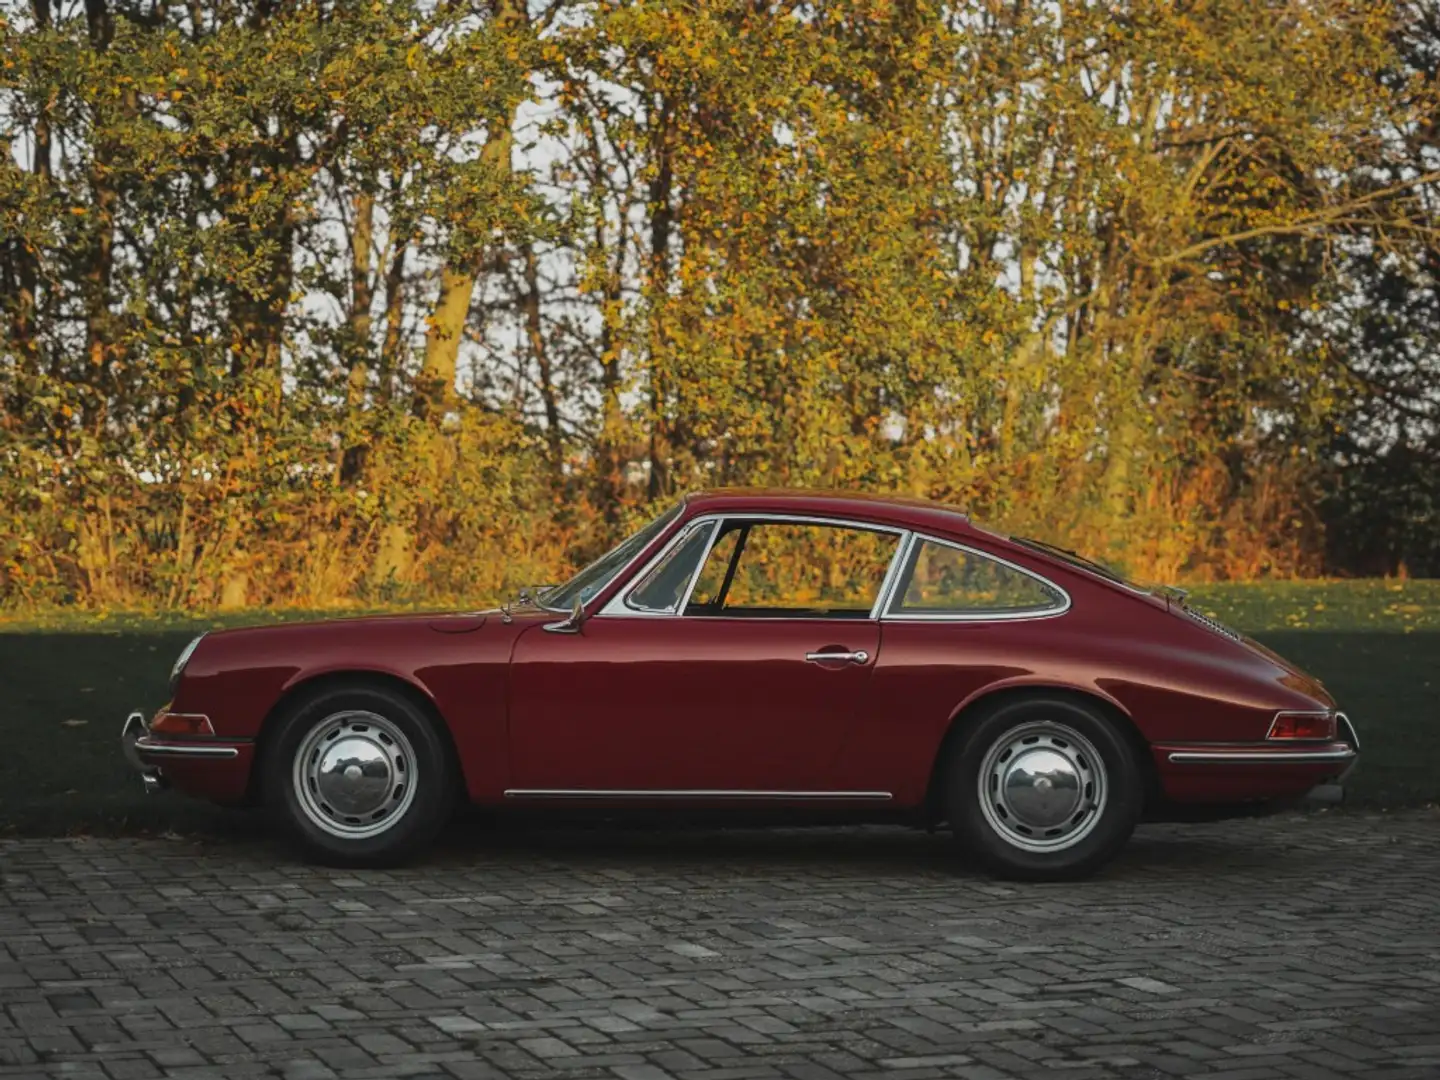 Porsche 911 1965 911 Coupe Matching numbers early chassis numb Red - 2